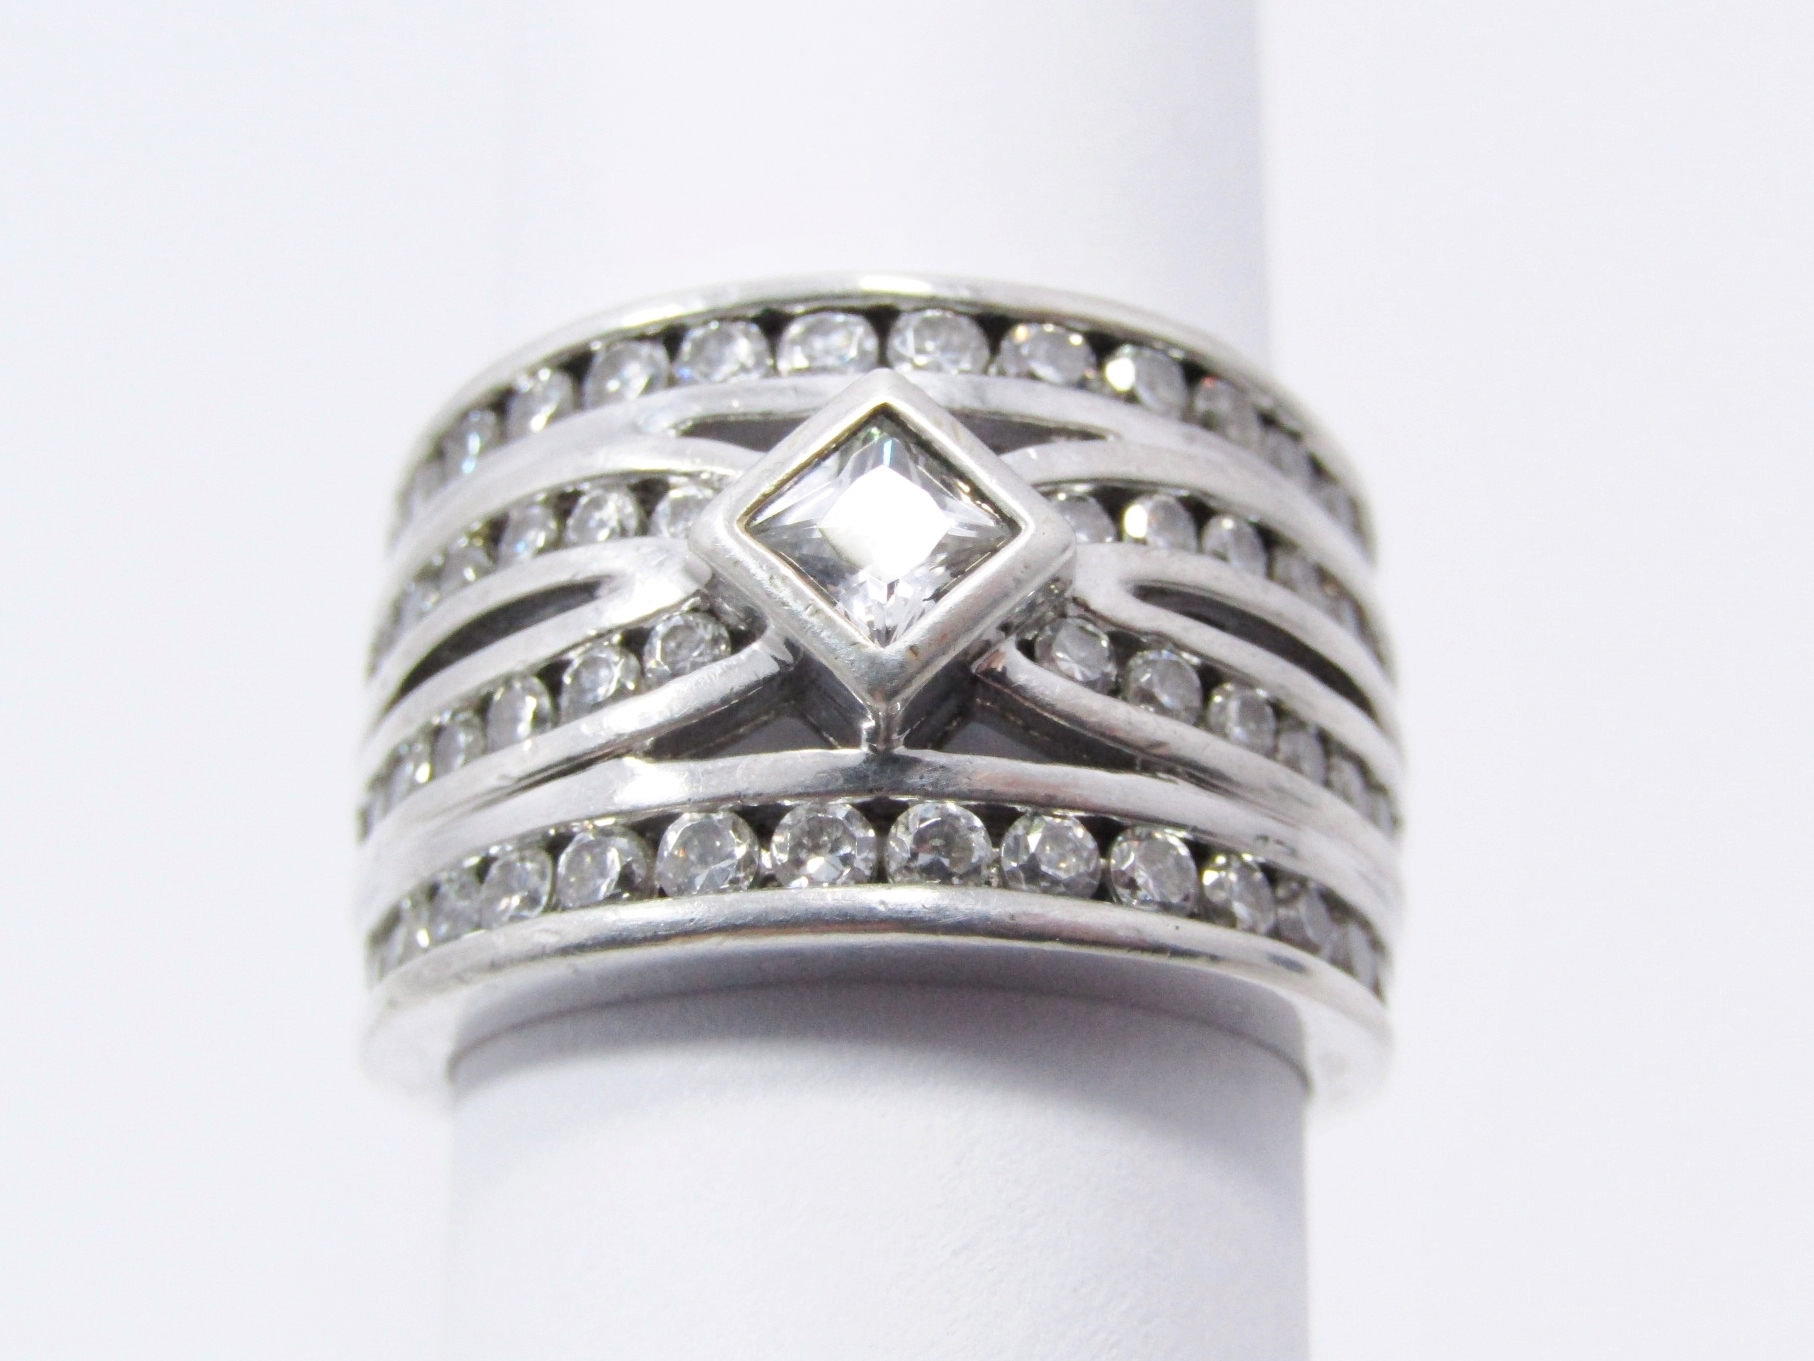 An Amazing Broad Four Band Into One Zirconia Ring in Sterling Silver.